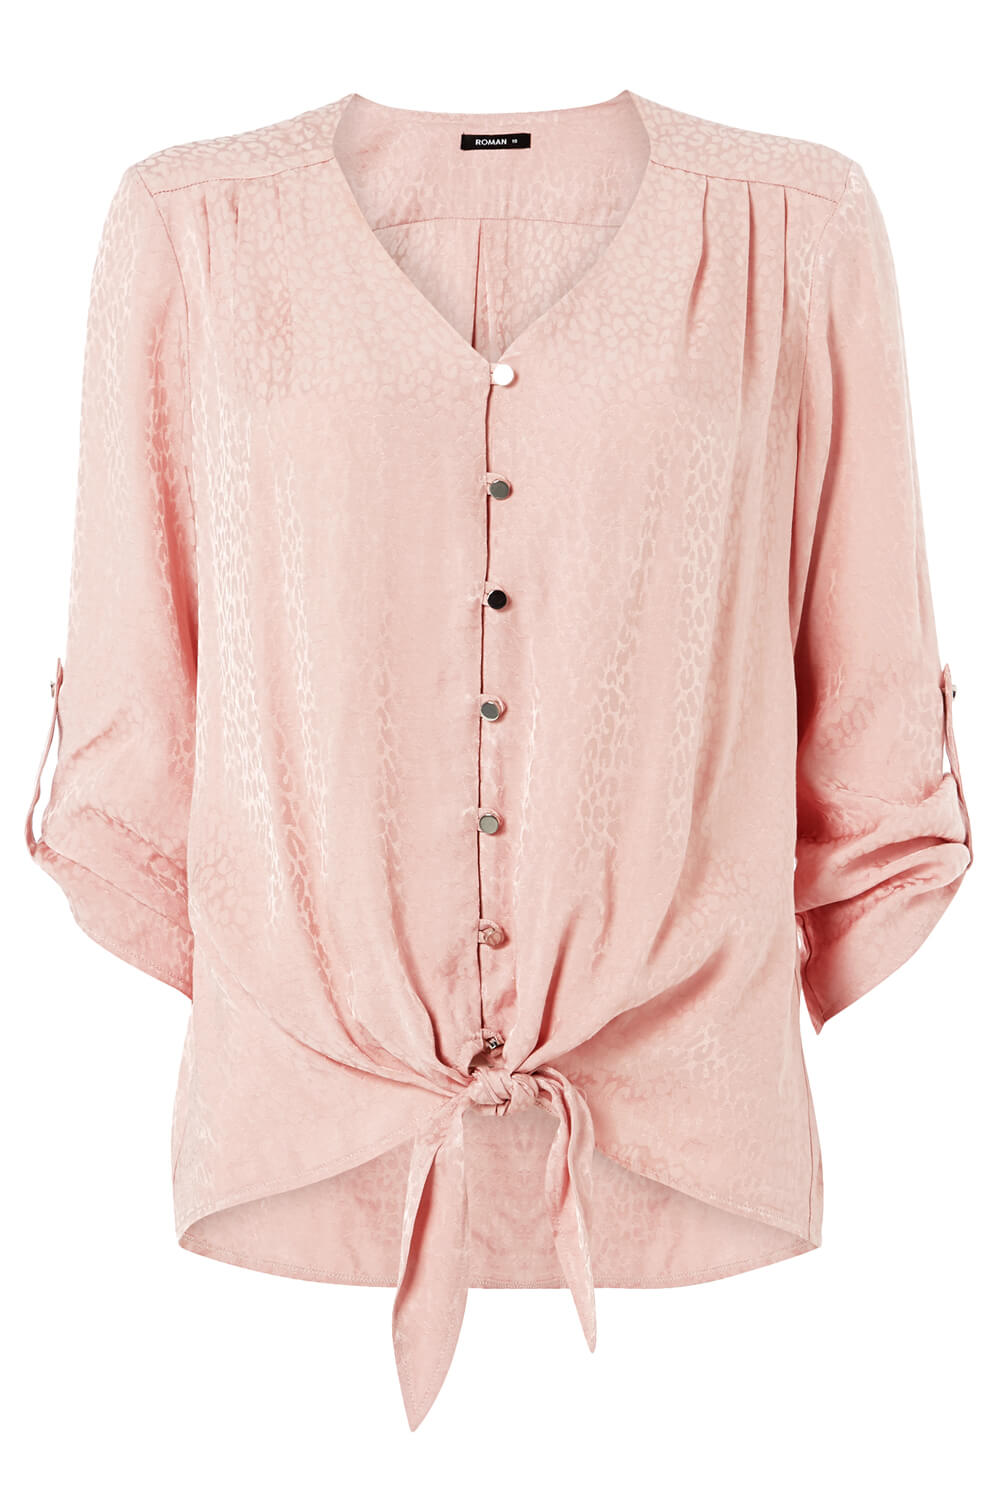 Light Pink Tie Front Animal Jacquard Blouse, Image 5 of 5